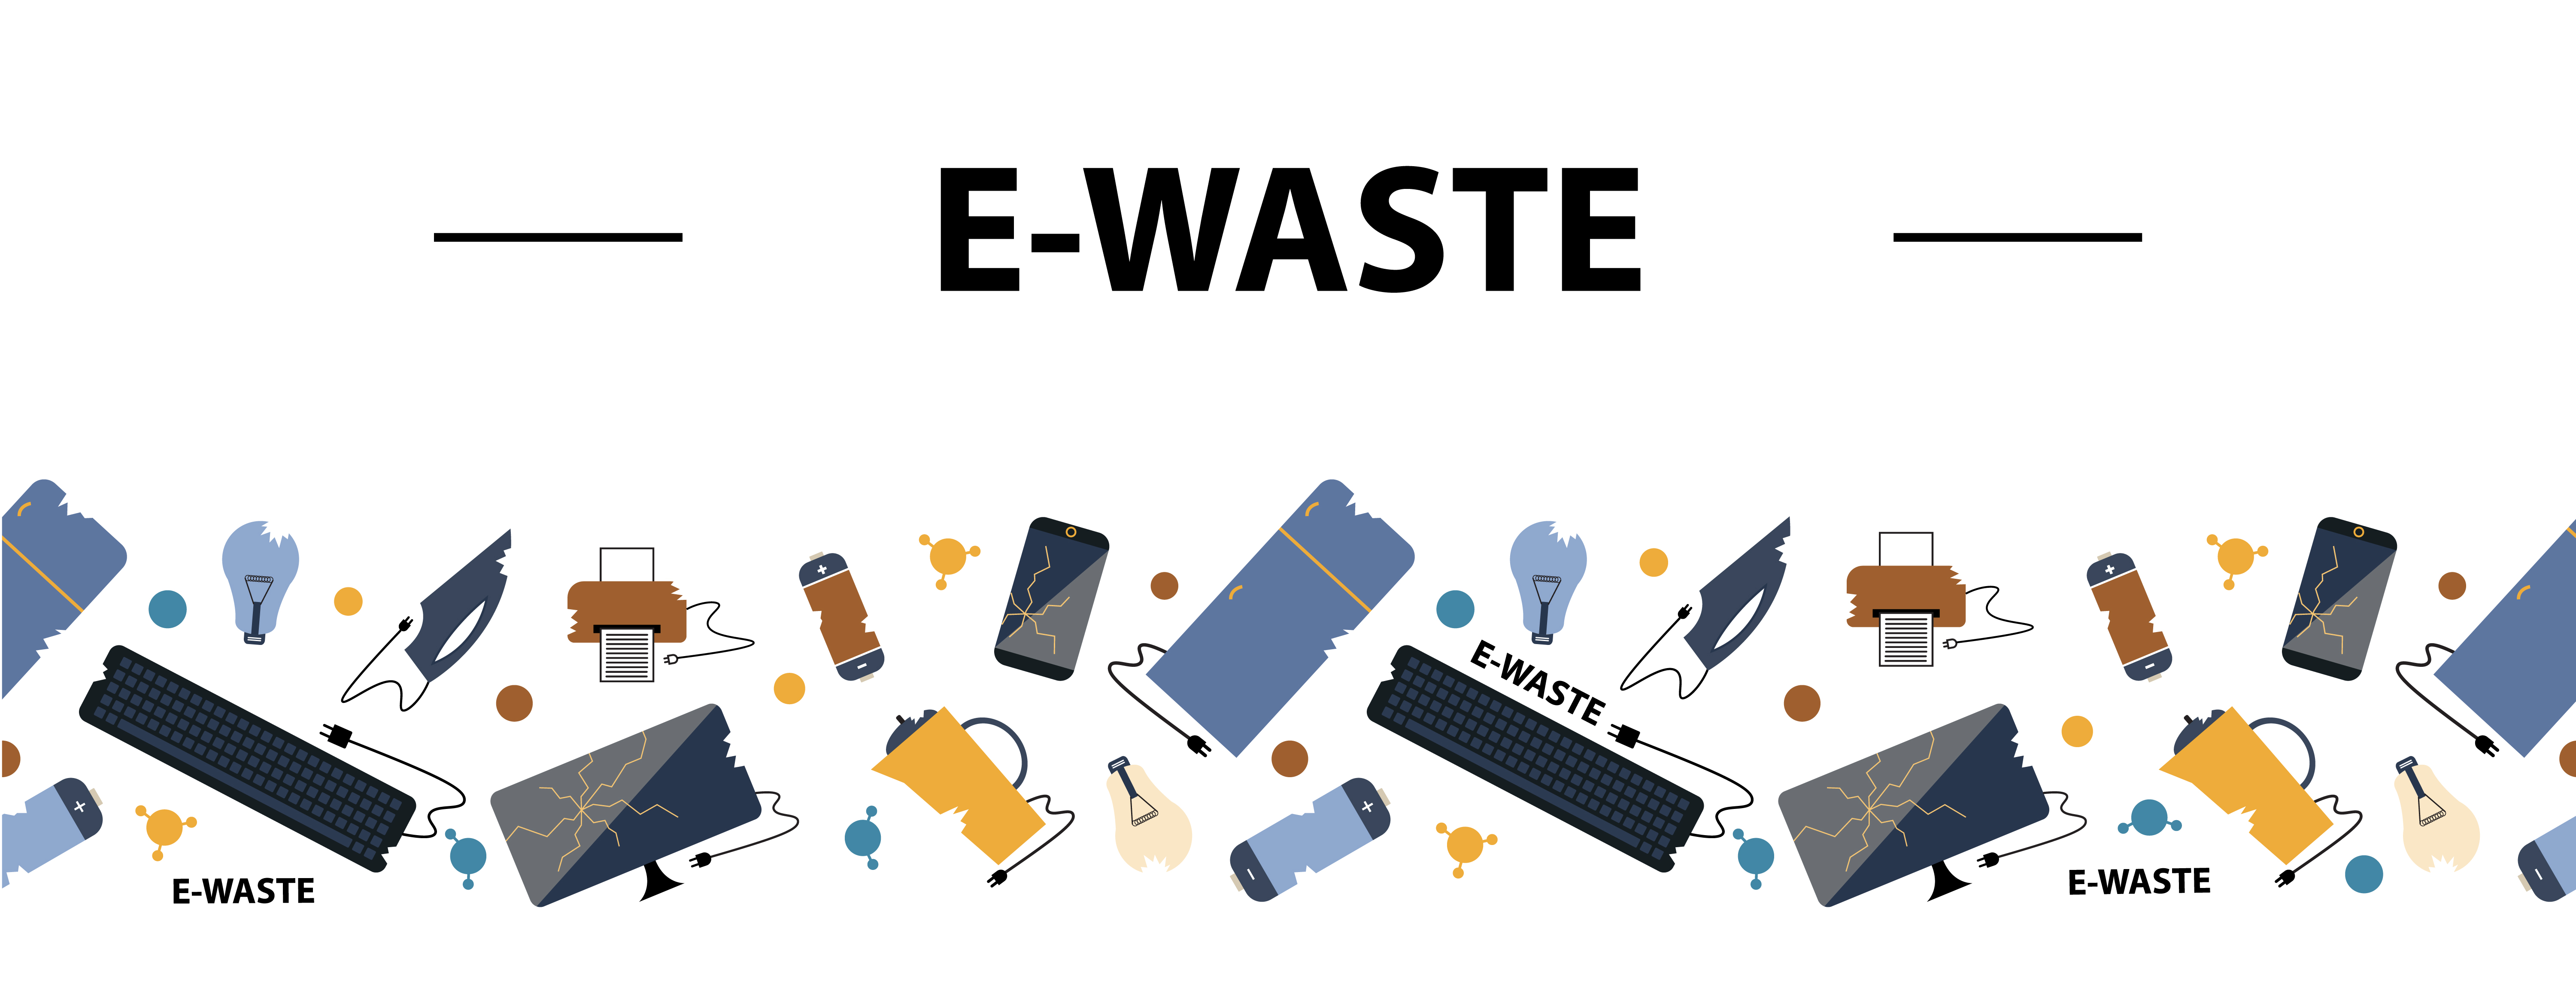 Horizontal seamless border. E-Waste sorting and recycling. Flat design style colorful illustration. Electrical waste symbols collection - computer; phone; kettle; printer; monitor; broken glass; iron, battery, keyboard, light bulb.